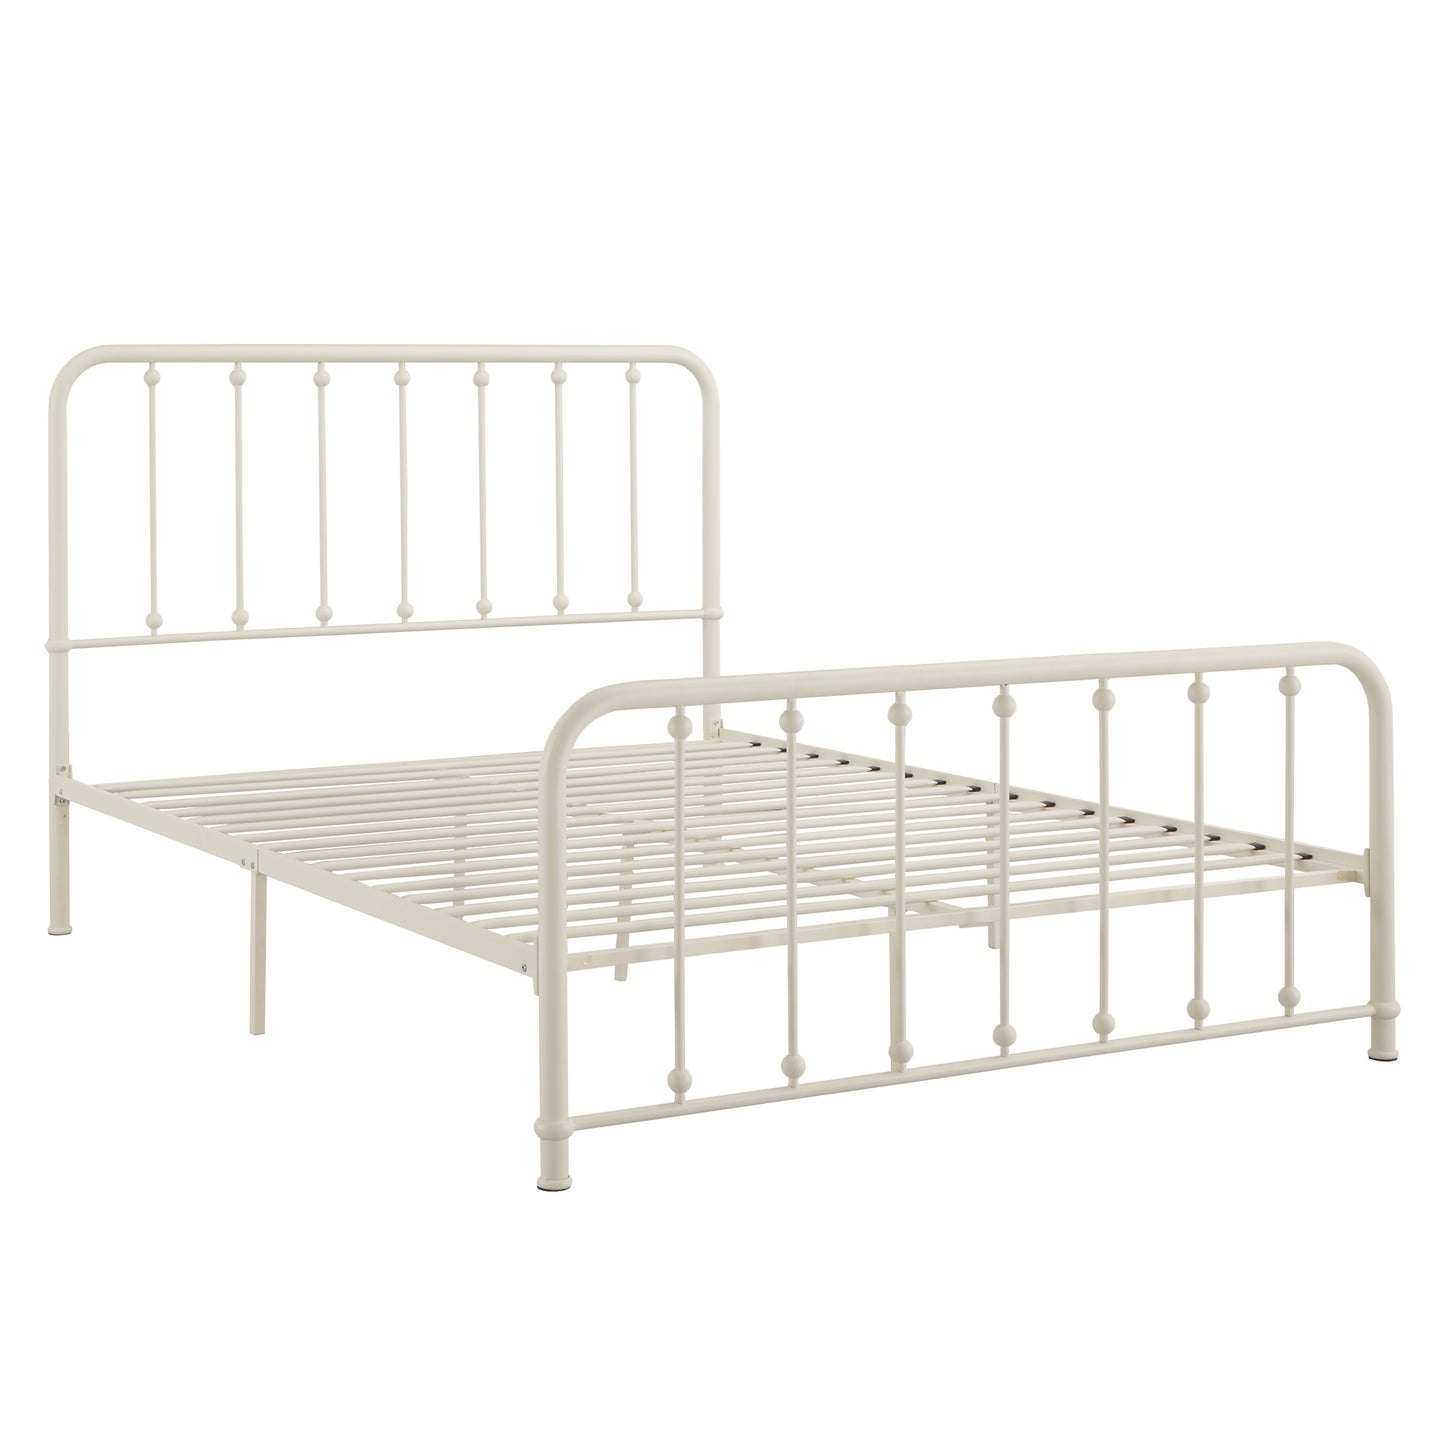 Local Pickup Only - Beaded Spindle Metal Platform Bed - White, Queen Size (Queen Size)